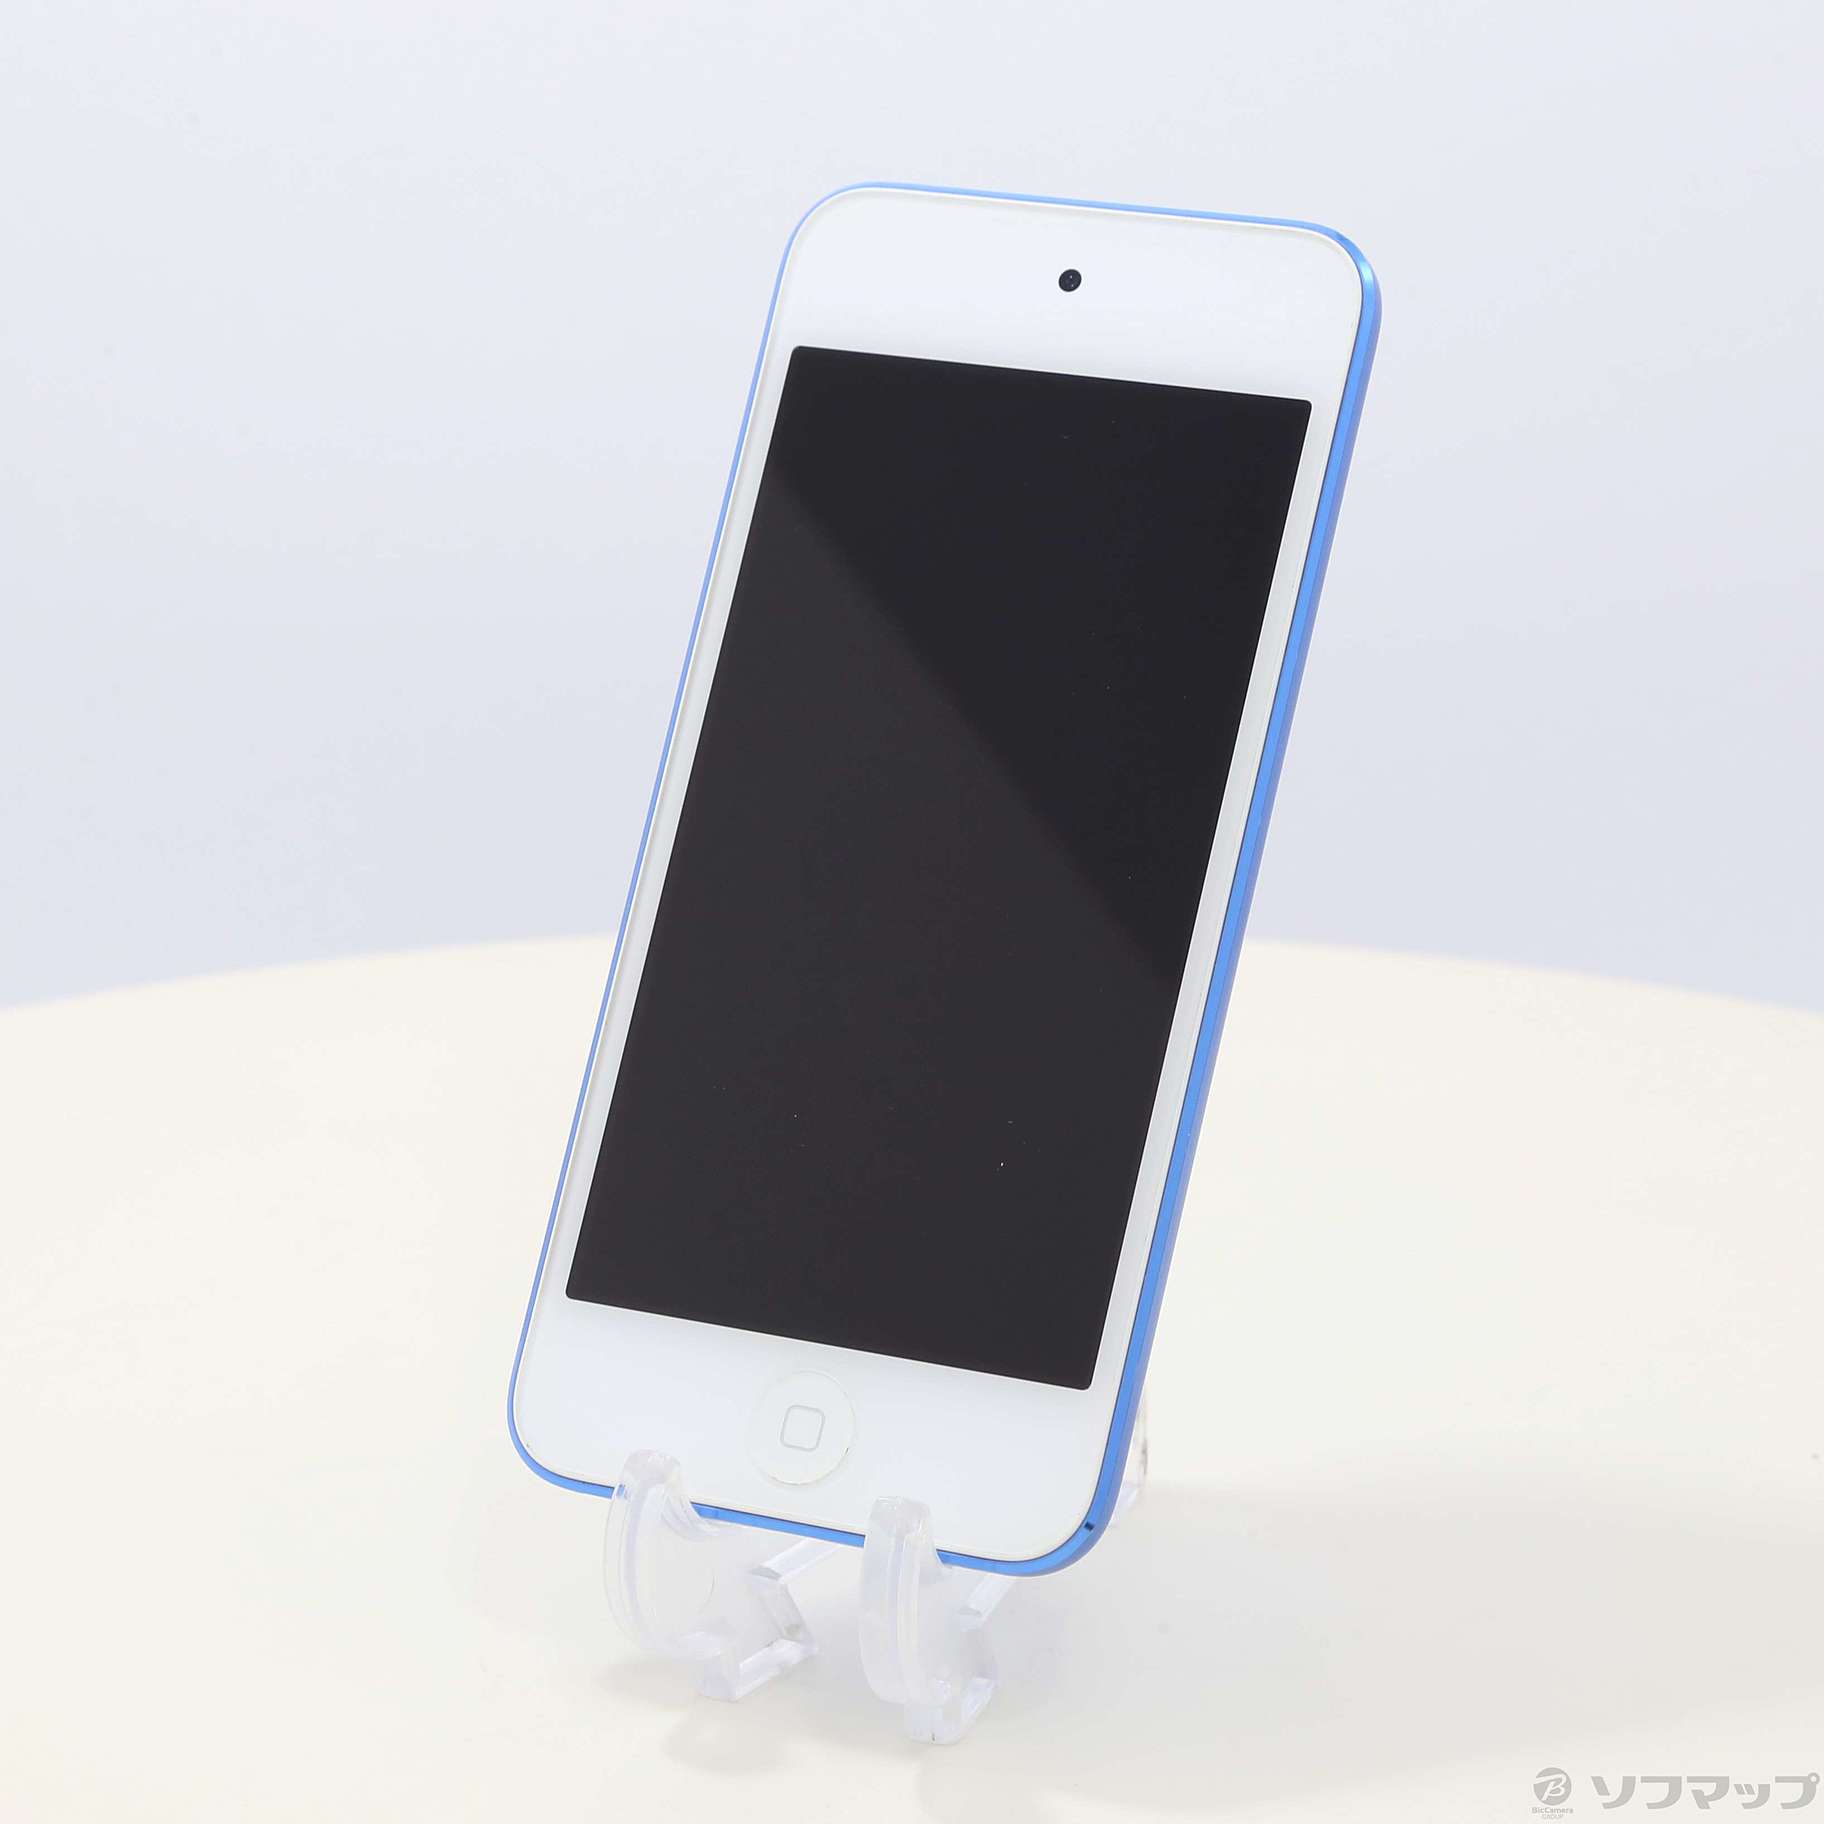 Apple iPod touch 第6世代 32GB ブルーiPodtouch6世代 - ポータブルプレーヤー